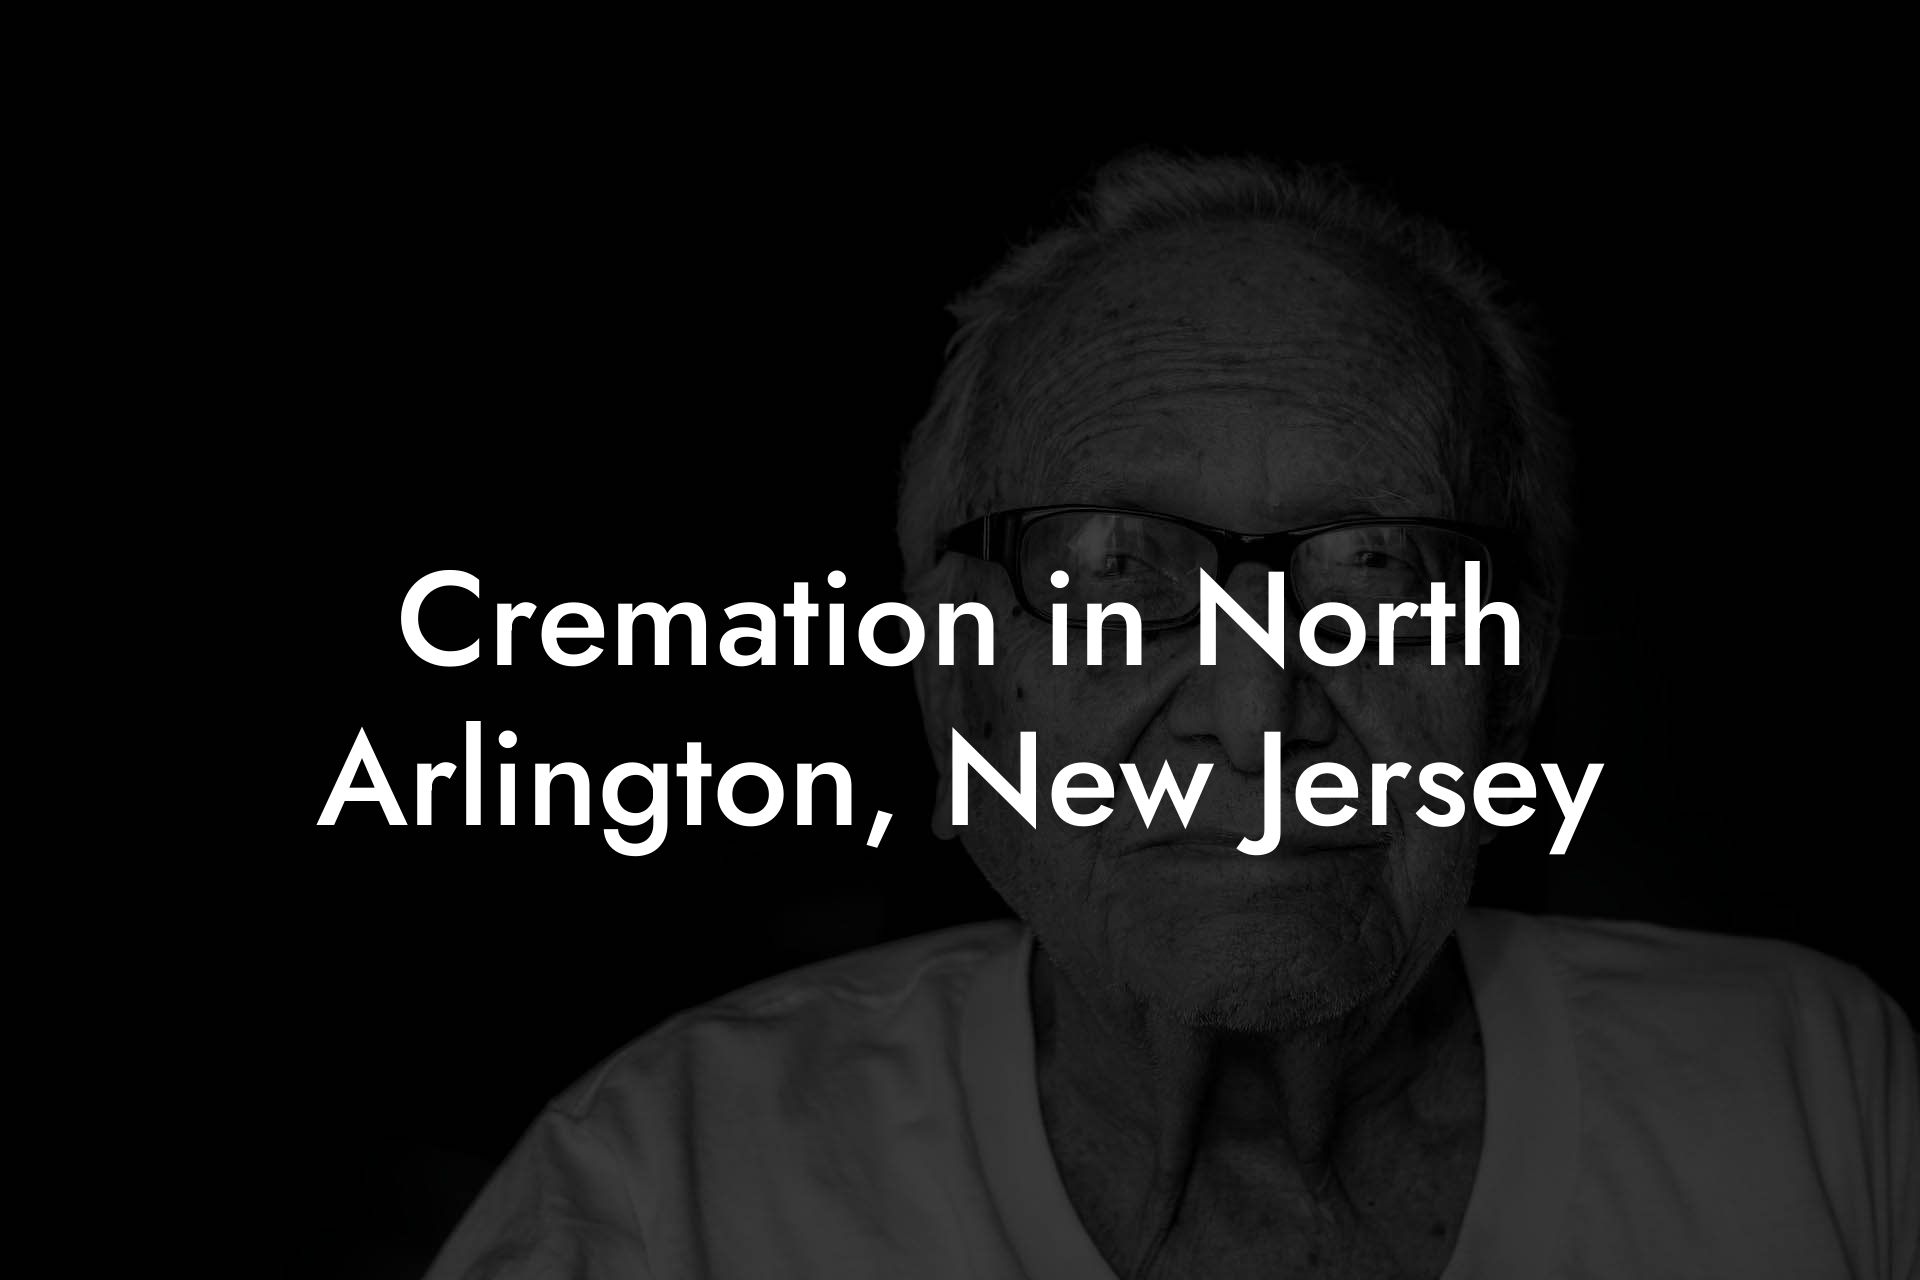 Cremation in North Arlington, New Jersey